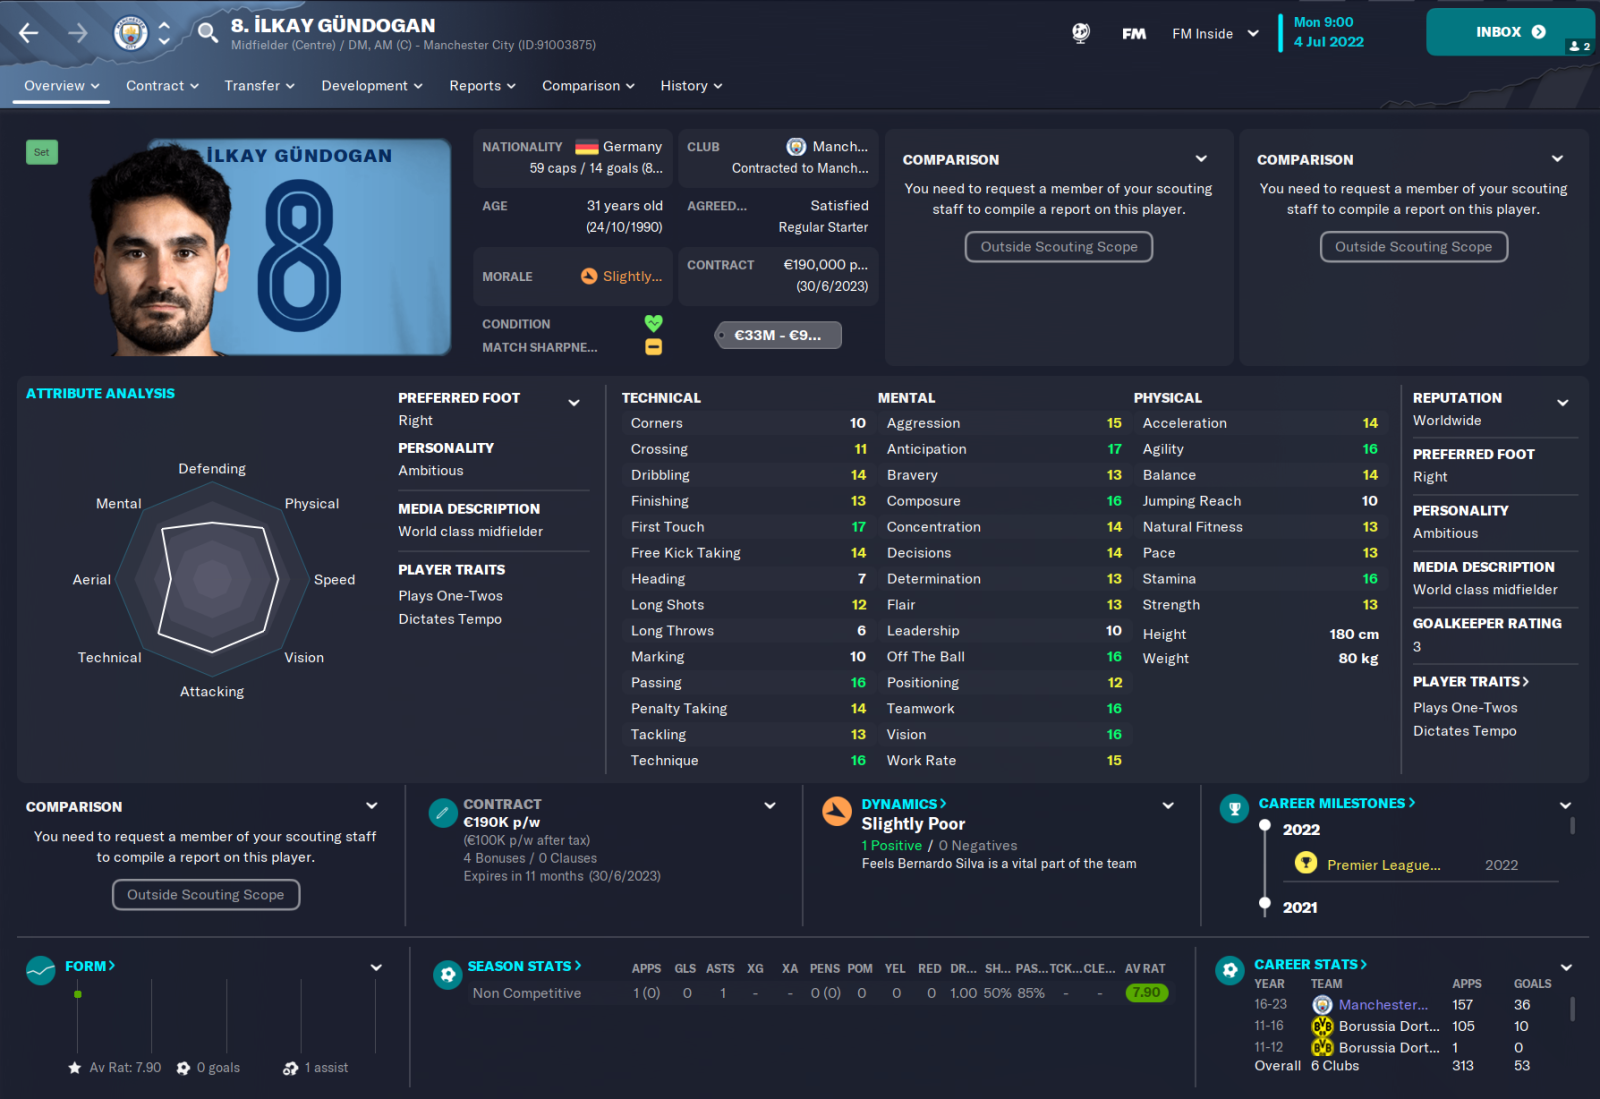 What is a Mezzala? Best players, roles and tactics explained using Football  Manager